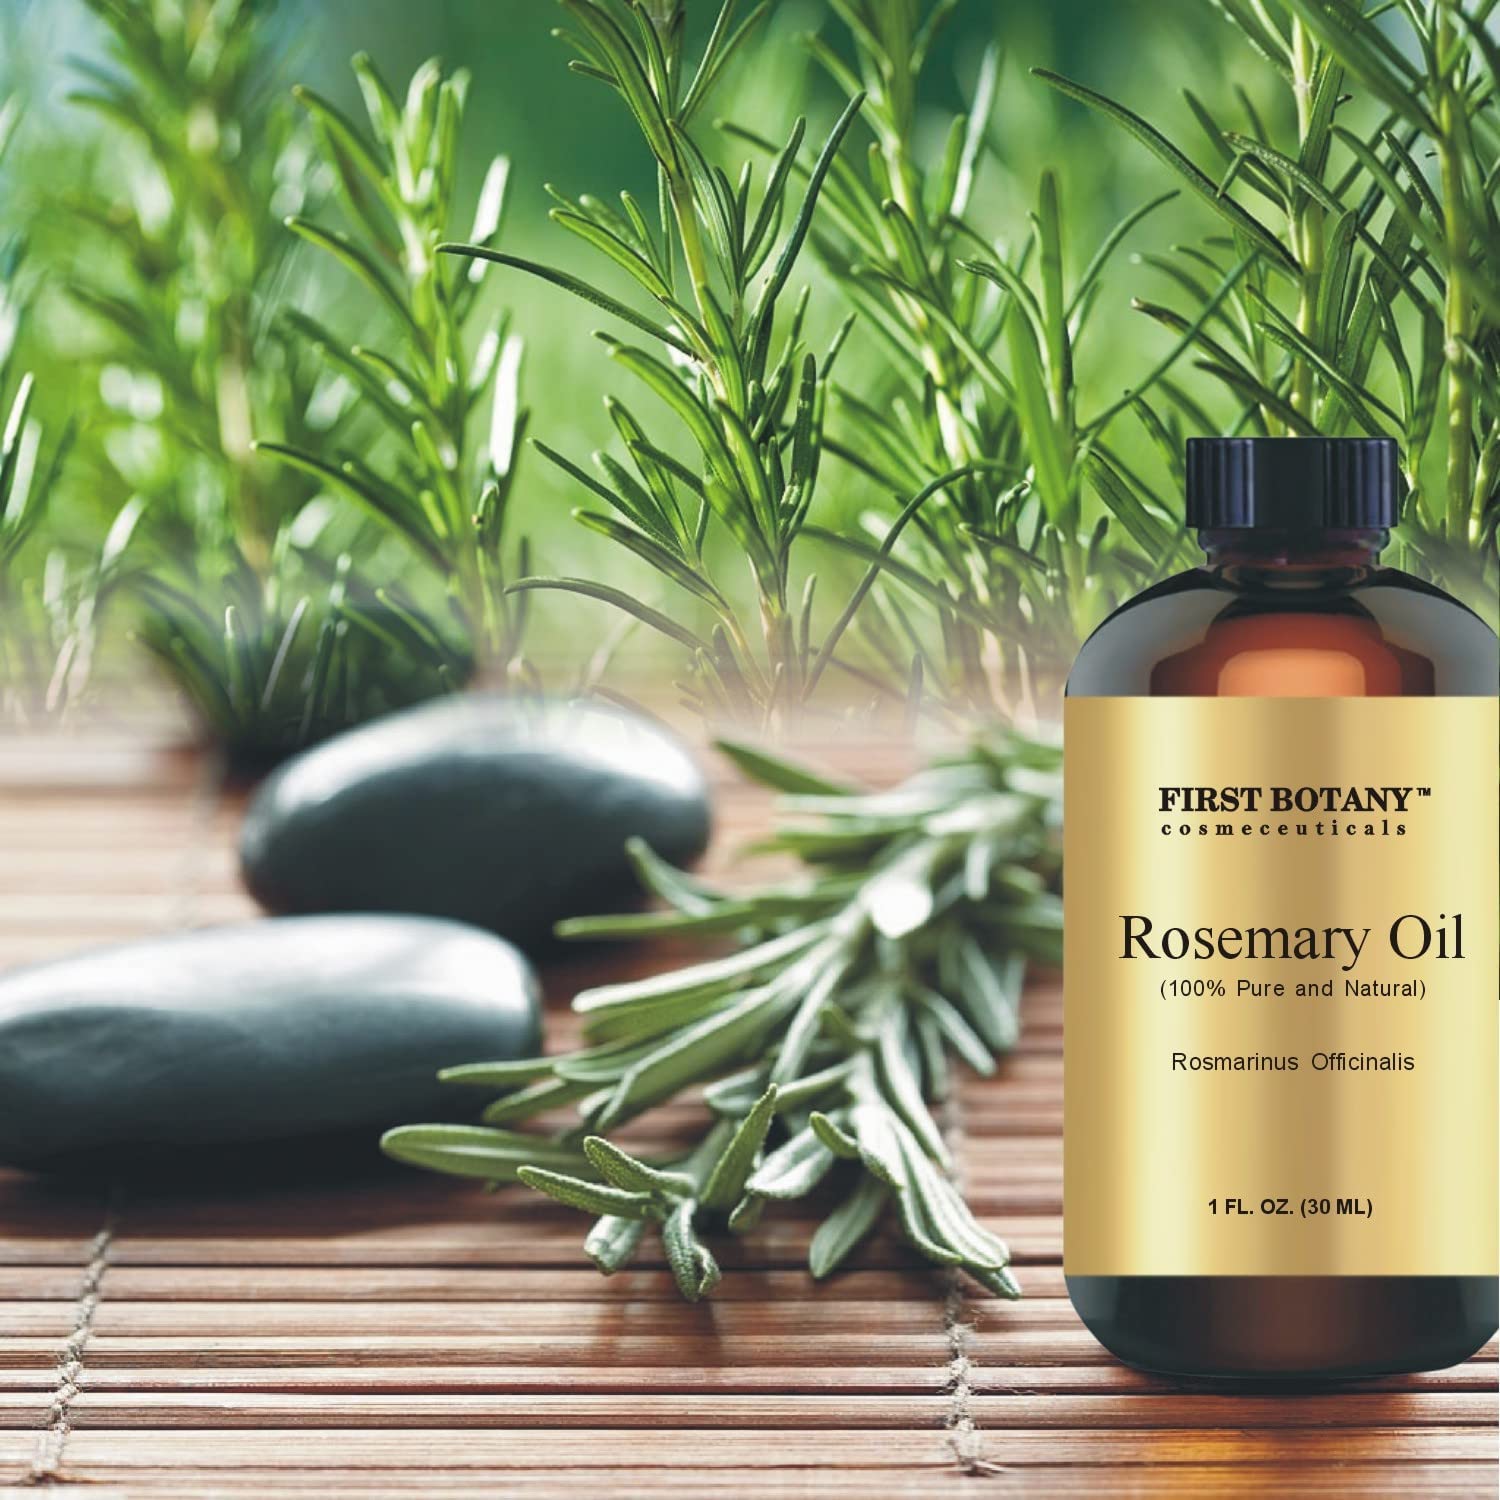 100% Pure Rosemary Essential Oil - Premium Rosemary Oil for Aromatherapy, Massage, Topical & Household Uses - 1 fl oz (Rosemary)